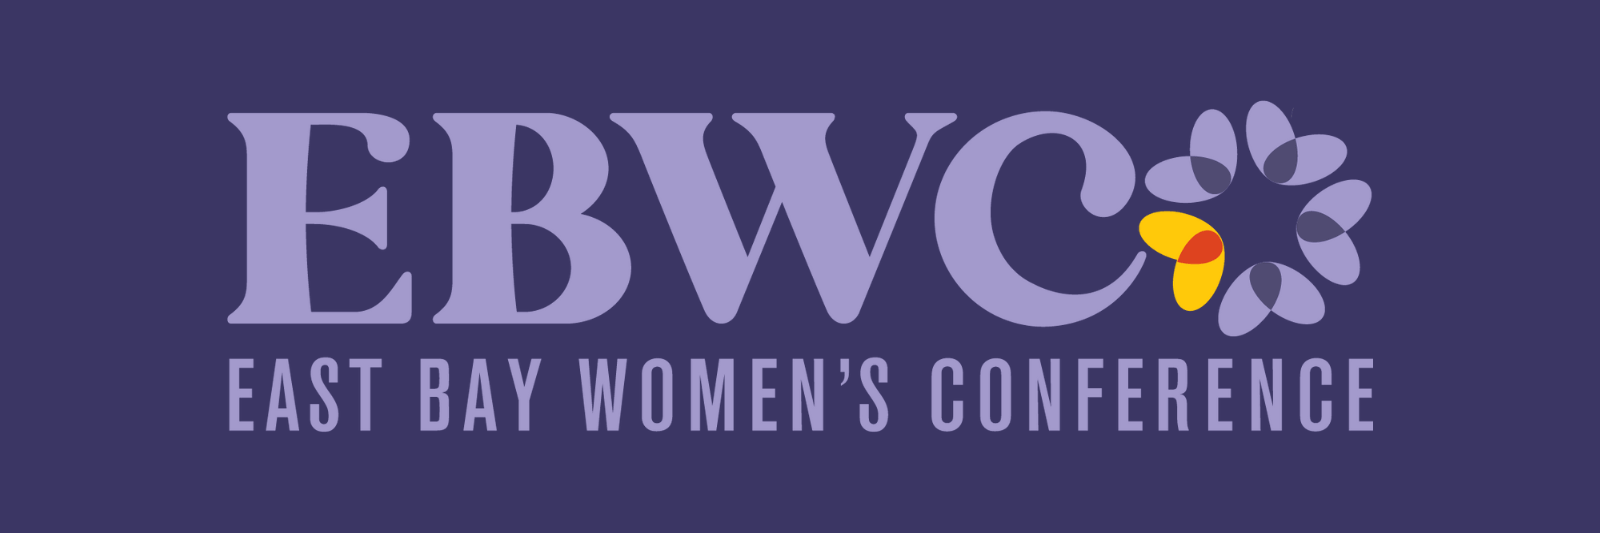 East Bay Women's Conference Logo